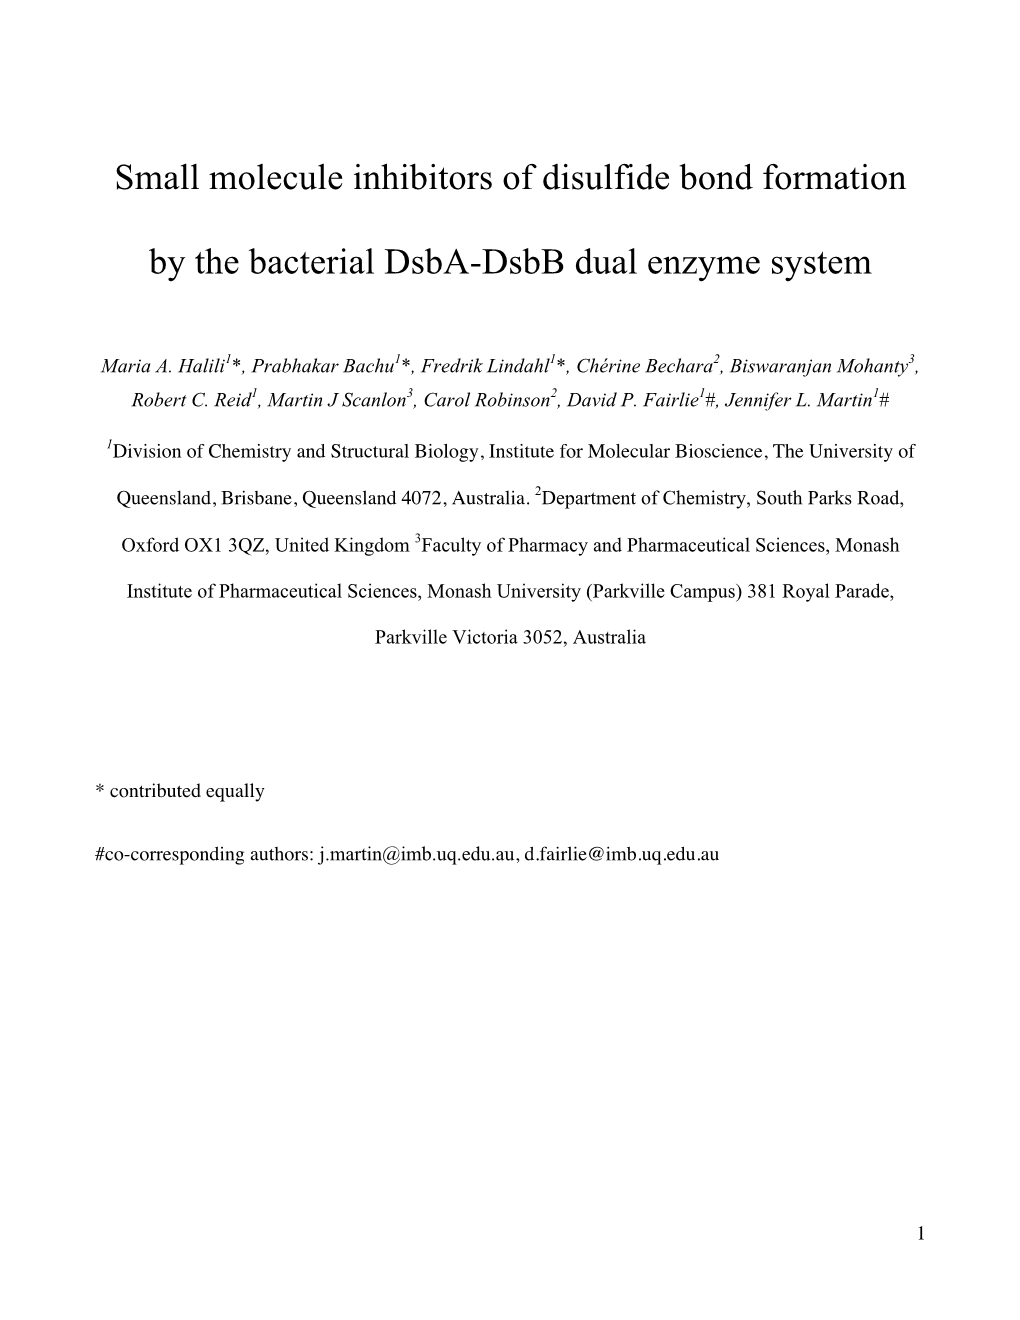 Small Molecule Inhibitors of Disulfide Bond Formation by the Bacterial